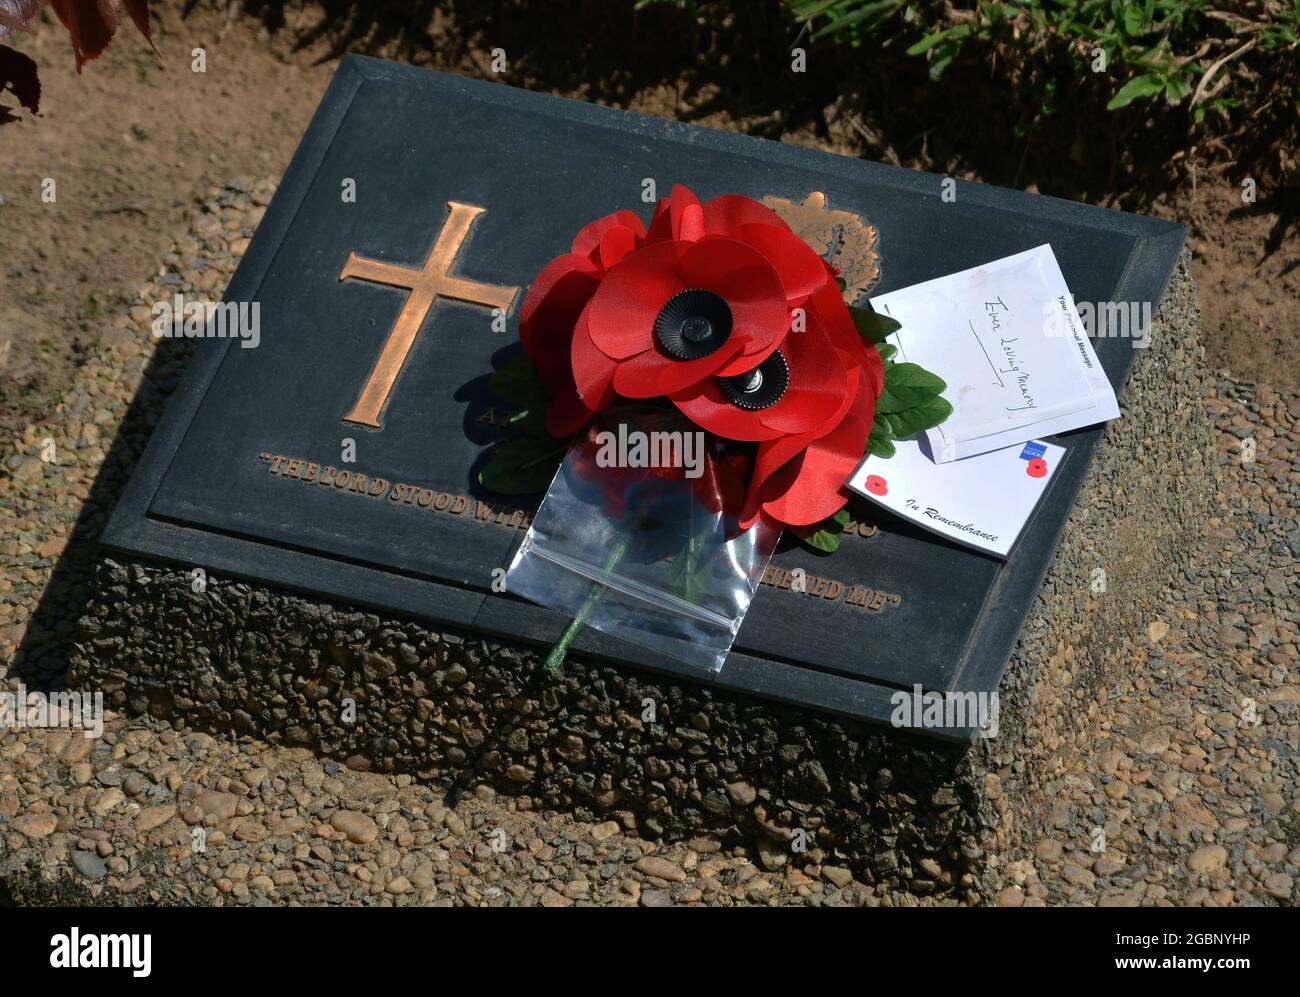 TAUKKYAN, MYANMAR (BURMA) - Oct 26, 2014: Red artificial poppies and remembrance cards placed on an unidentified Commonwealth war grave Stock Photo